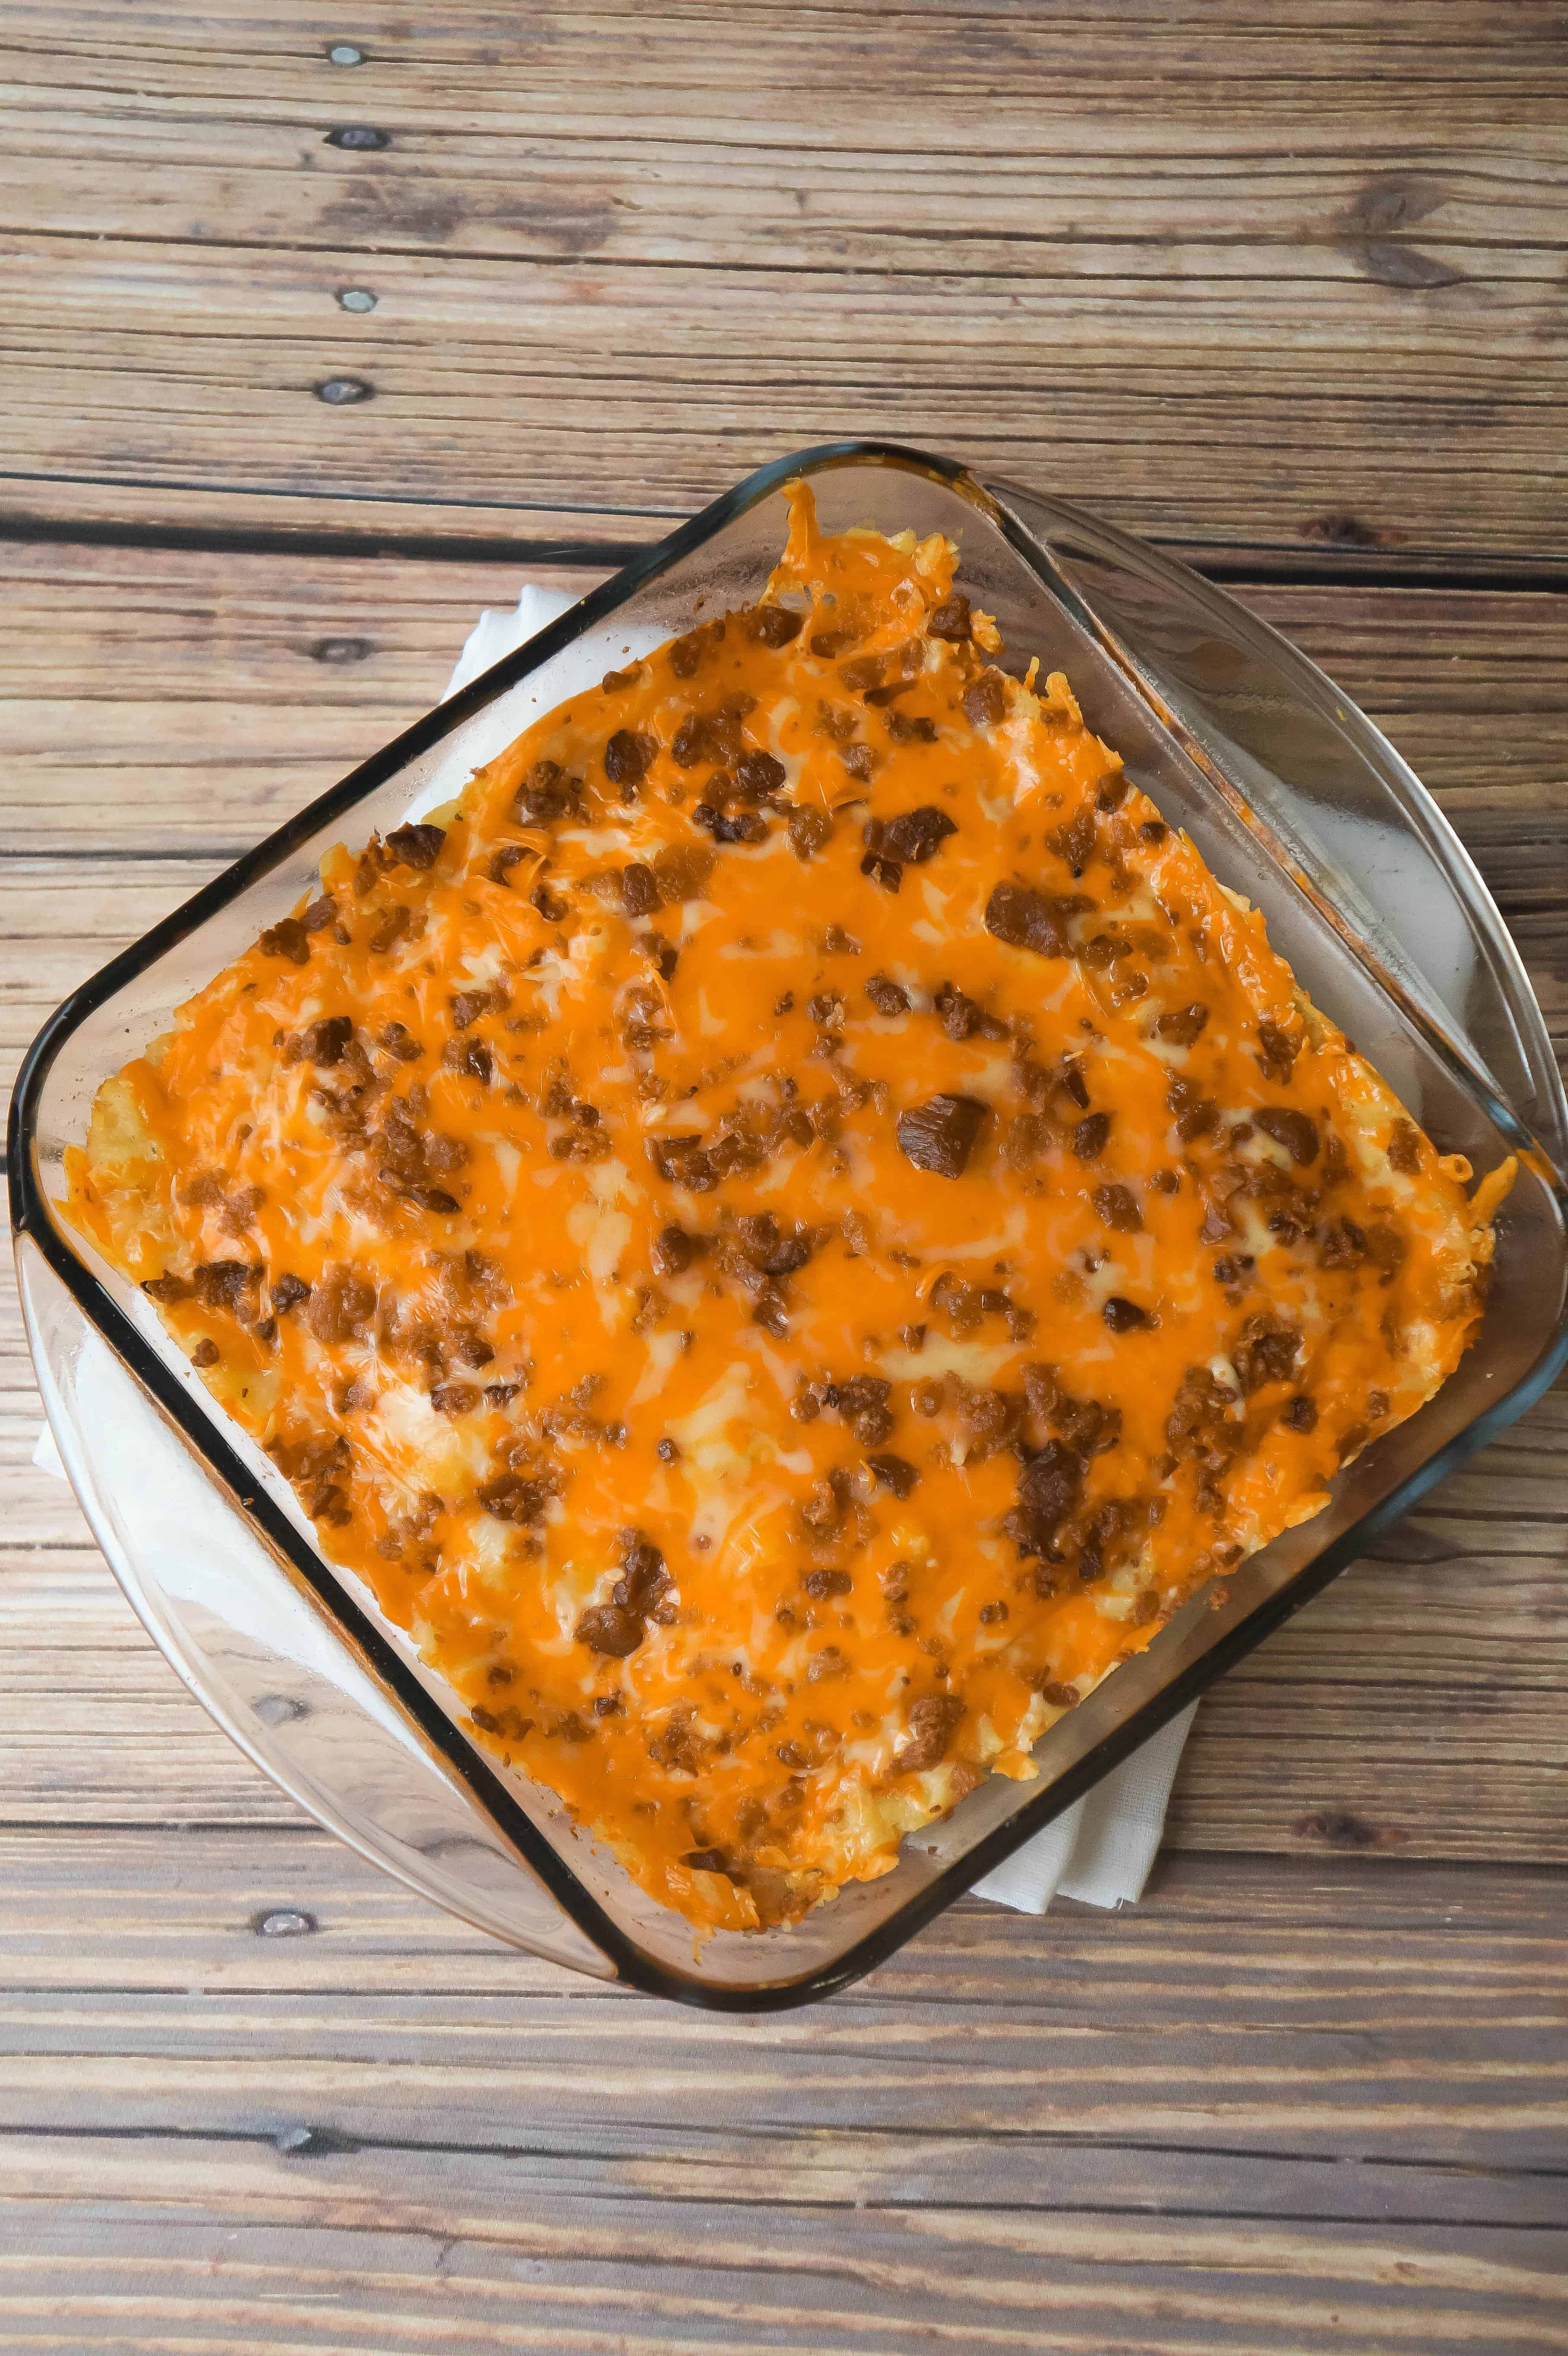 This easy ground beef casserole recipe is loaded with potatoes, cheese and bacon.